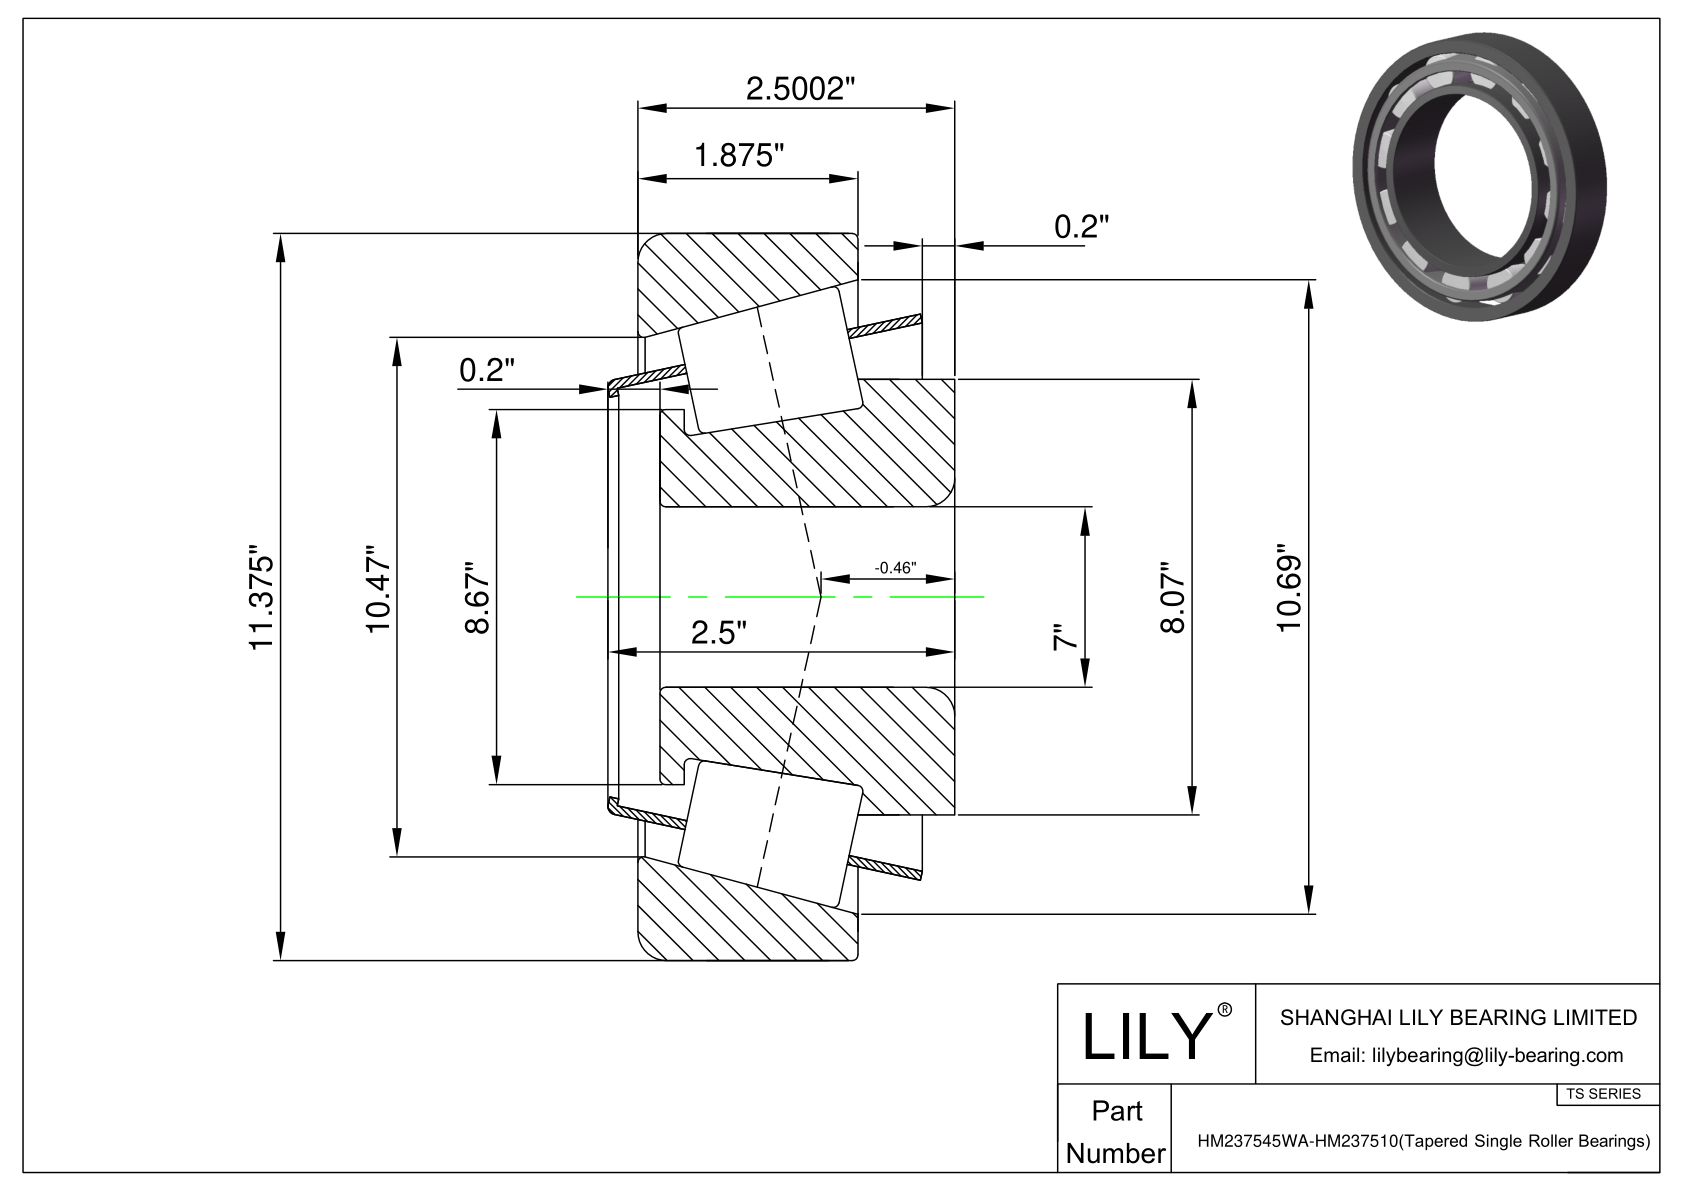 HM237545WA-HM237510 TS (Tapered Single Roller Bearings) (Imperial) cad drawing